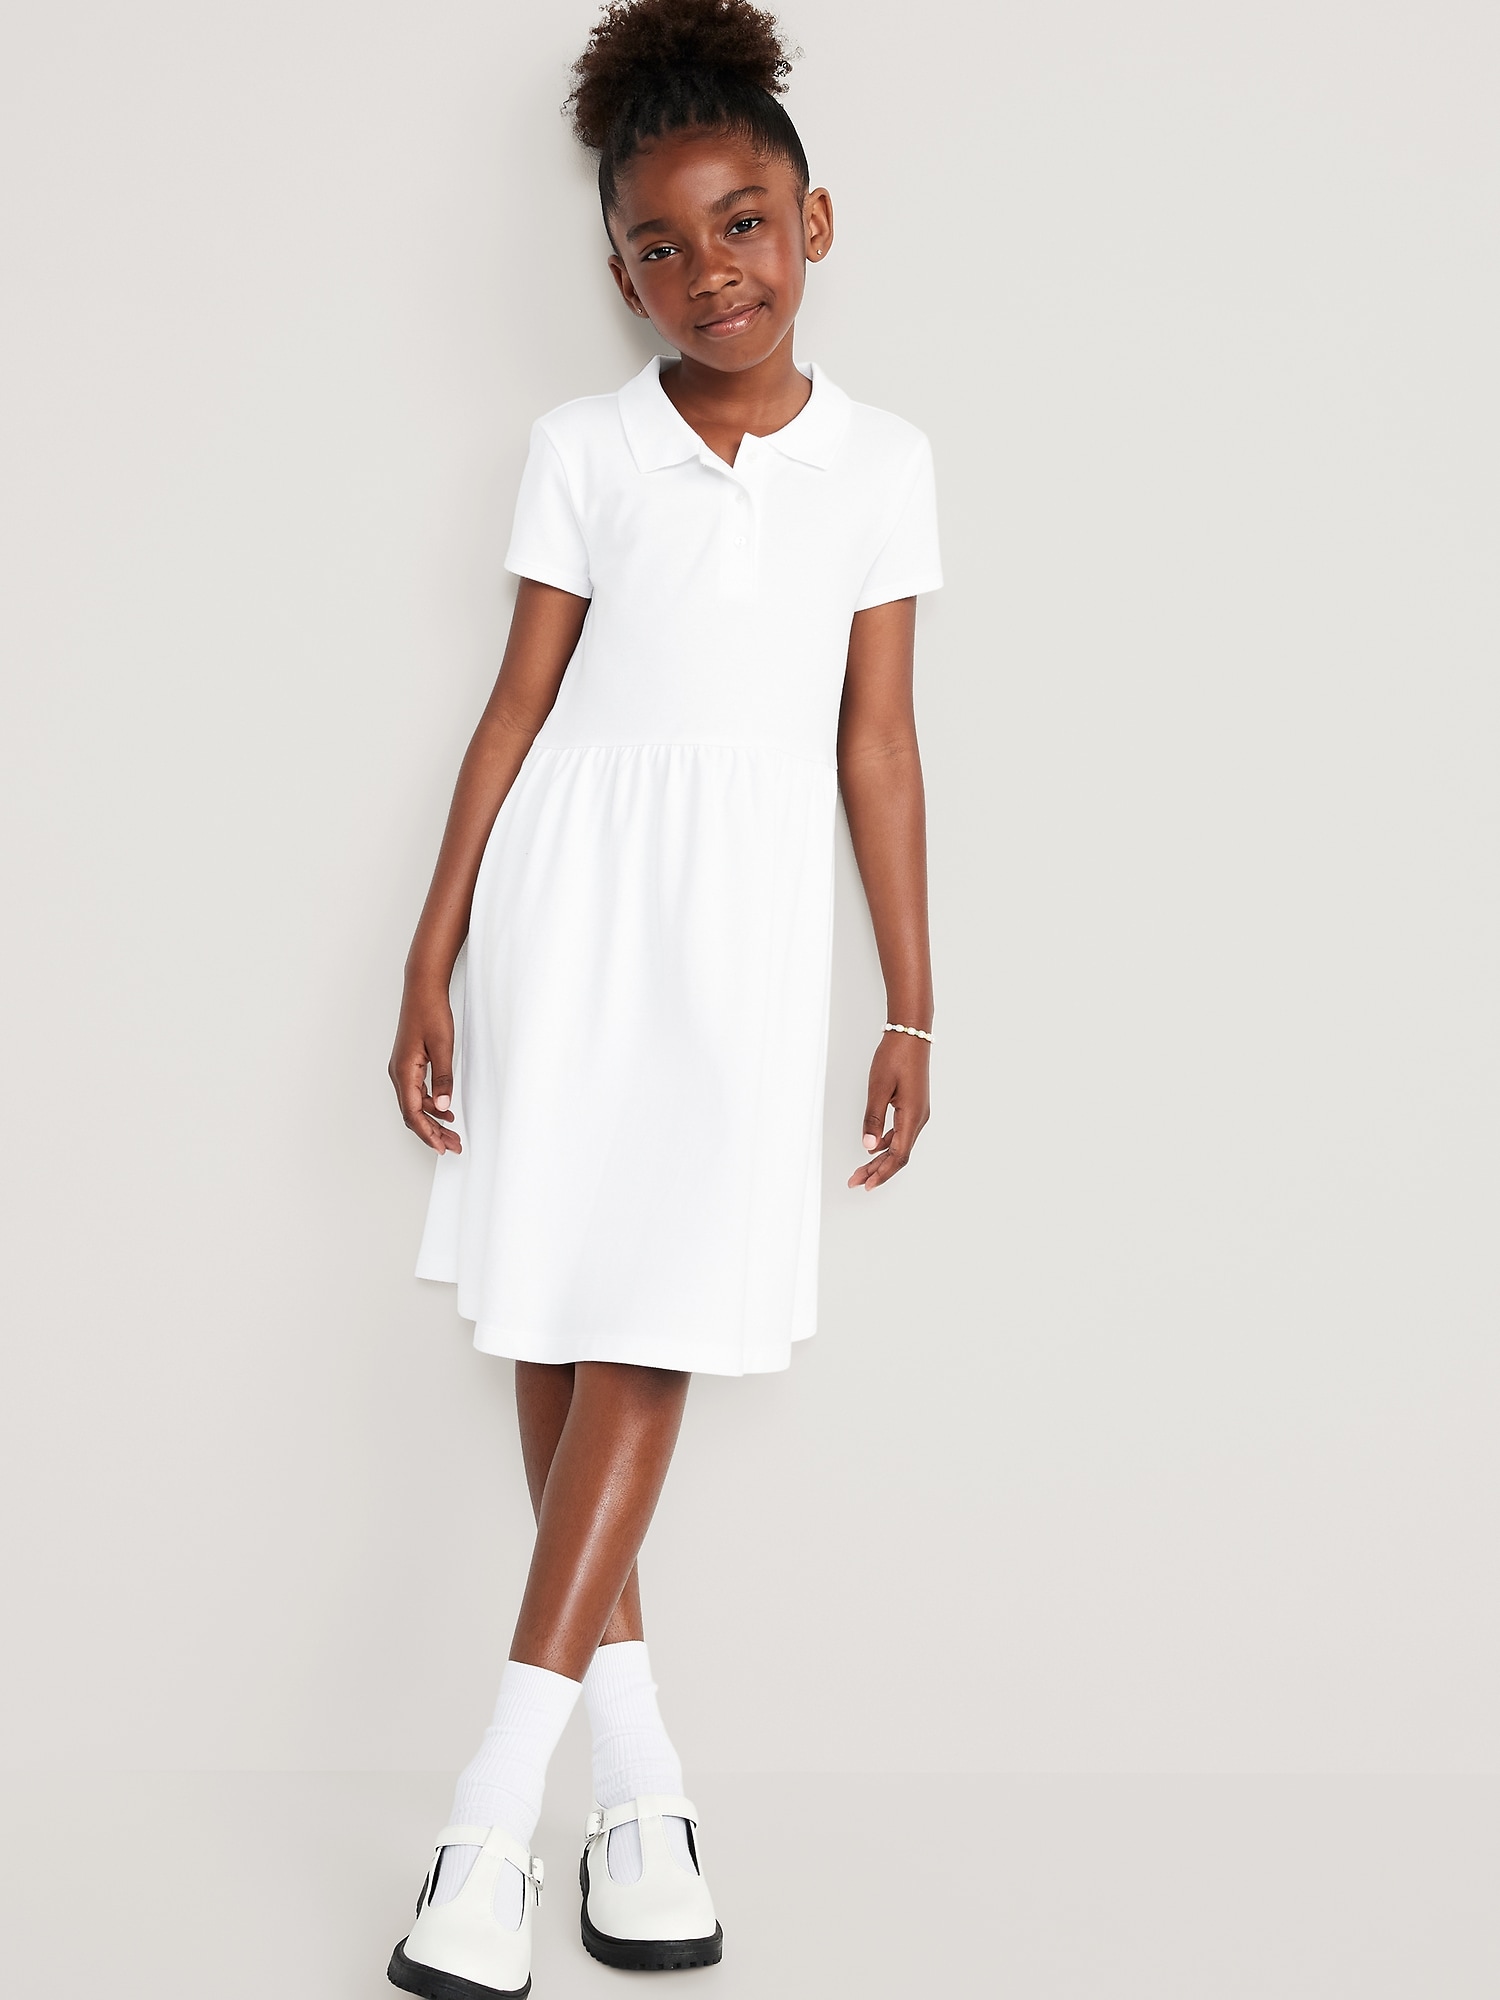 Shop back-to-school uniforms from Old Navy, Gap and more - Good